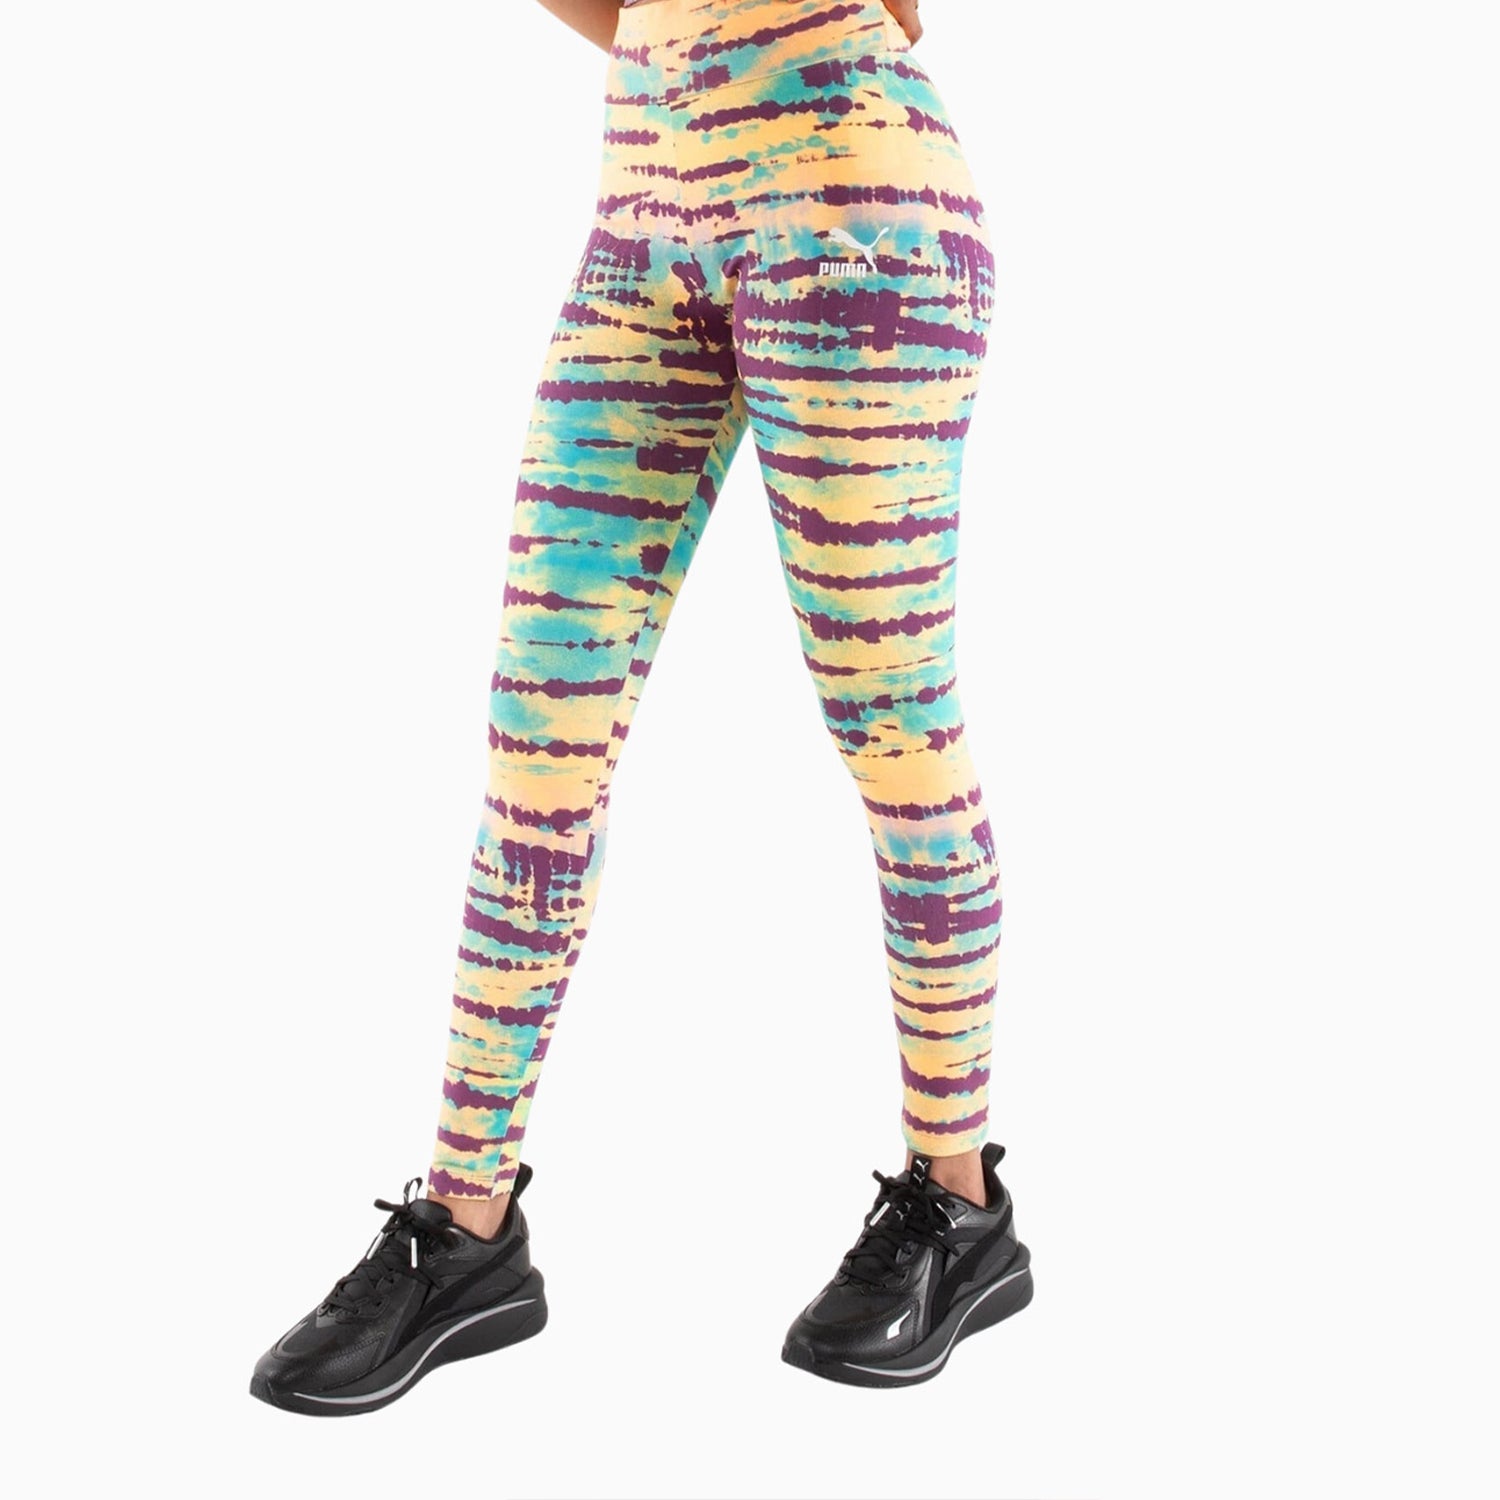 puma-womens-streetwear-graphic-outfit-532552-51-533869-17